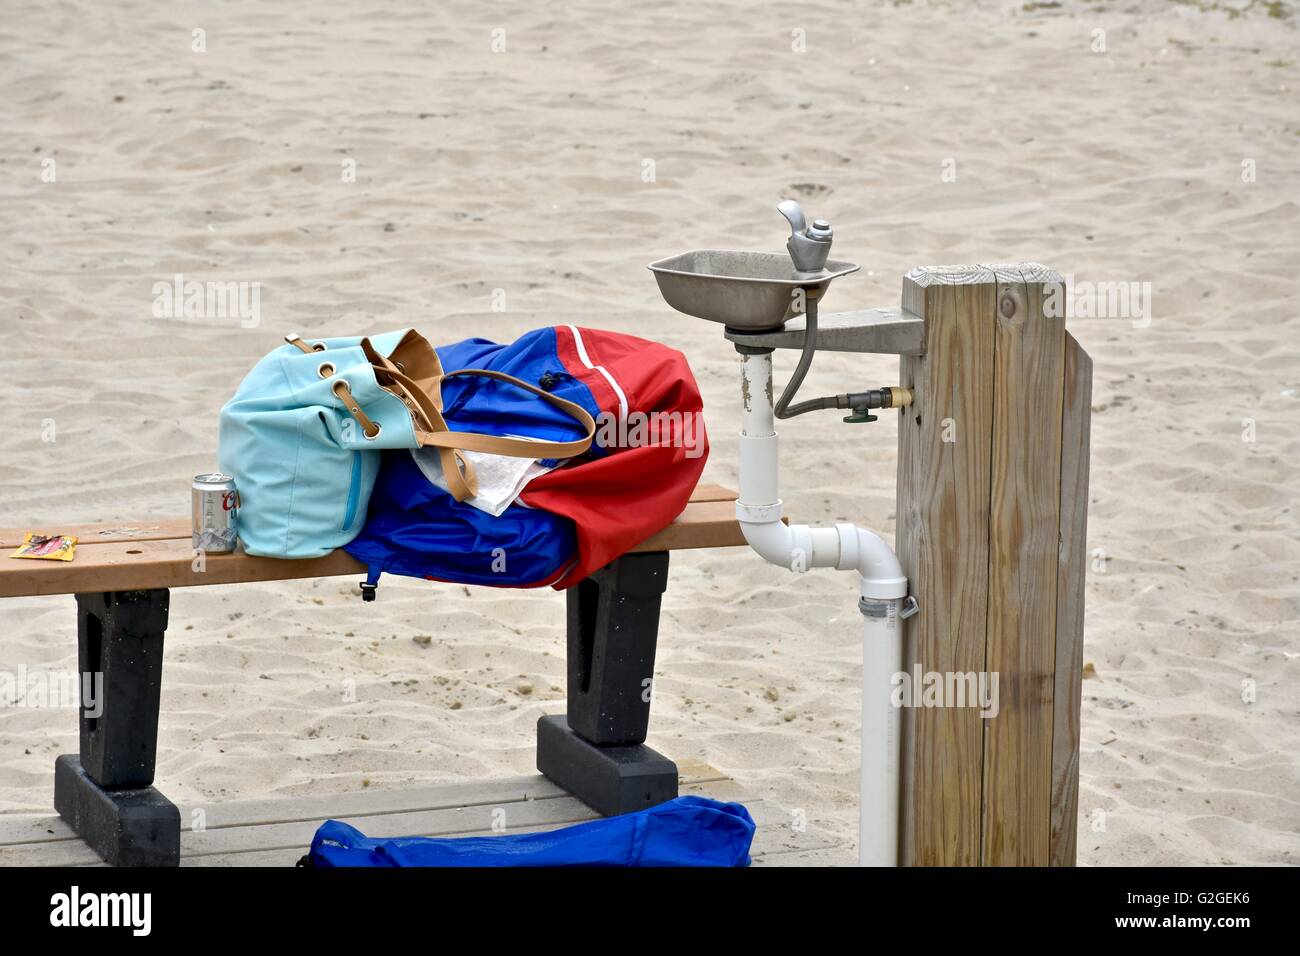 Articles of clothing and personal belongings left on a bench next to a water fountain at the beach at Assateague island Stock Photo